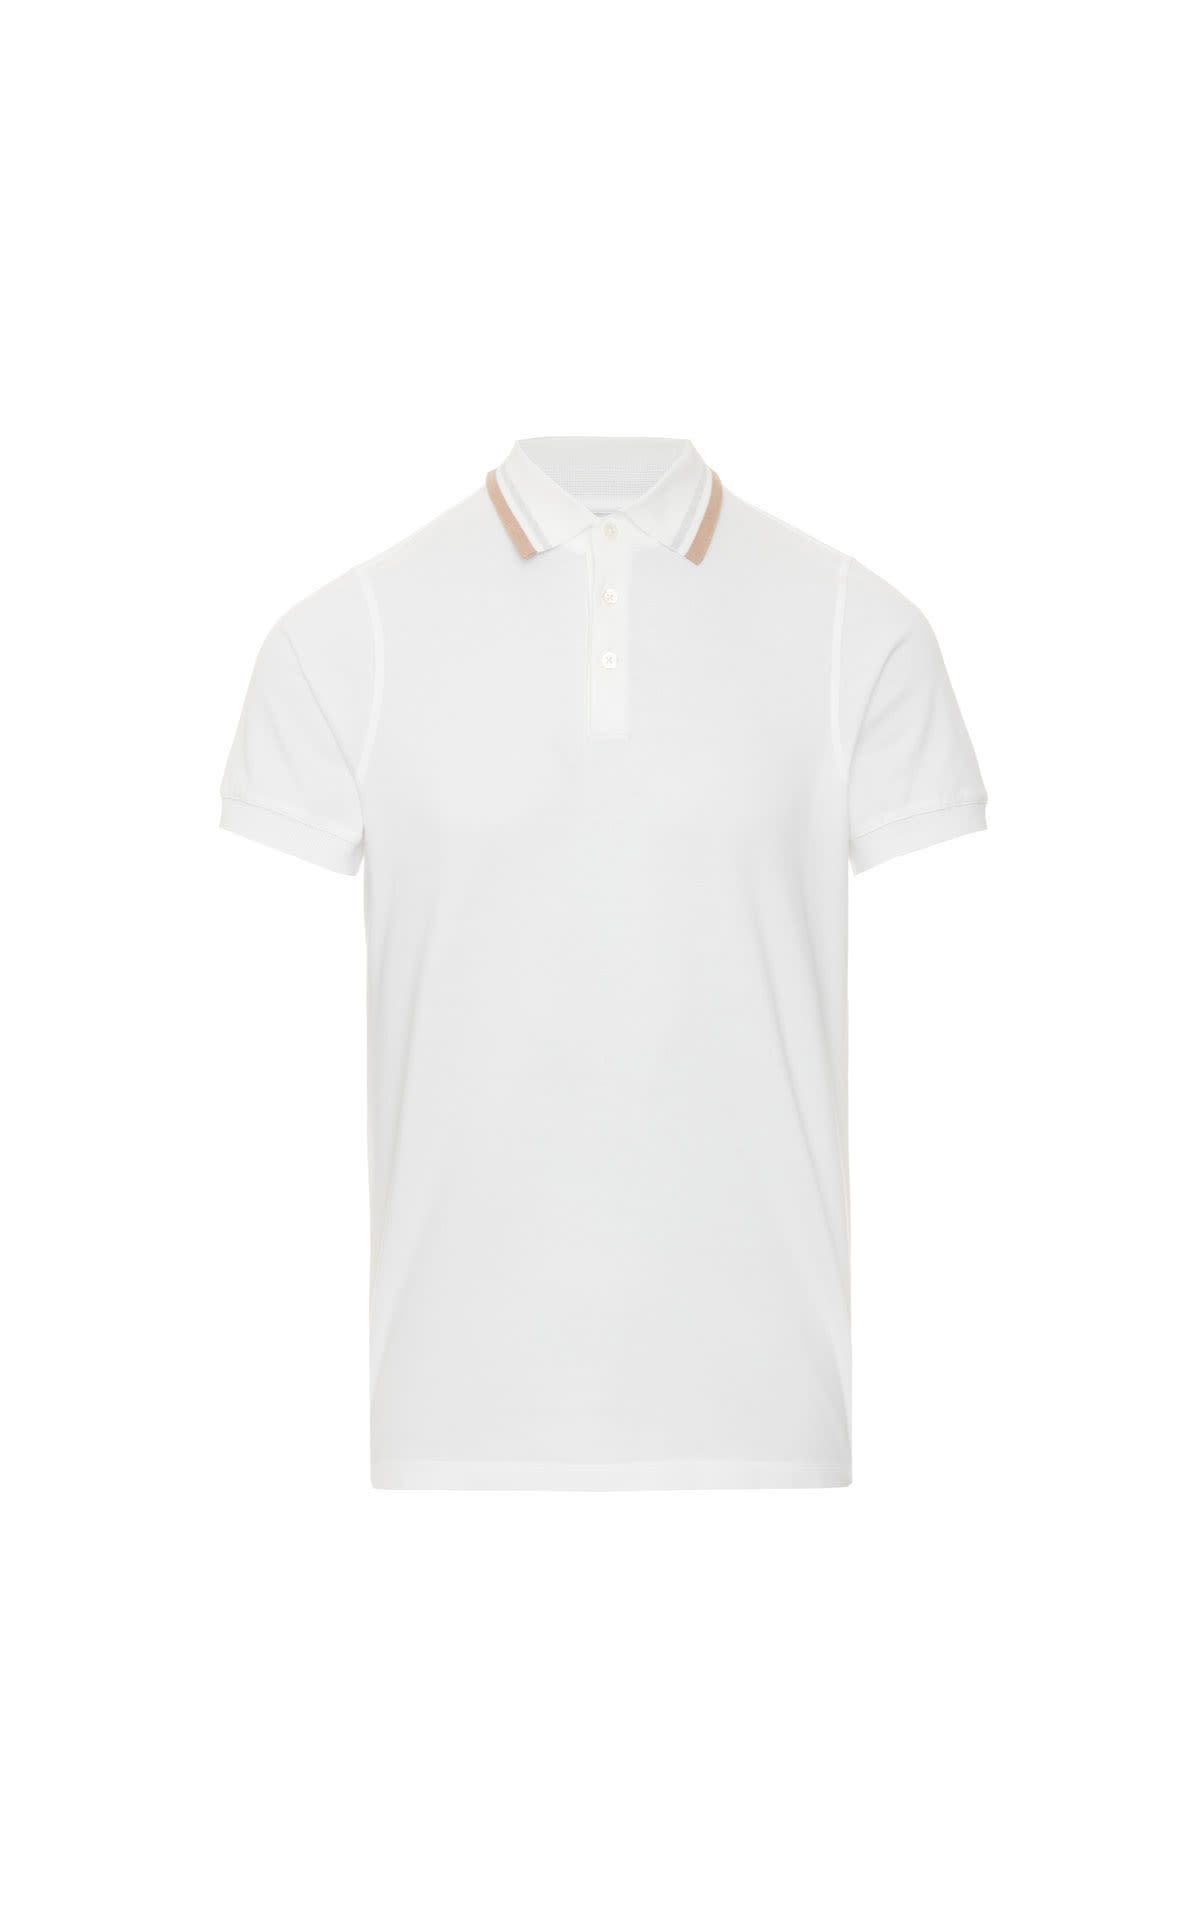 Brunello Cucinelli Polo with contrast collar piping from Bicester Village